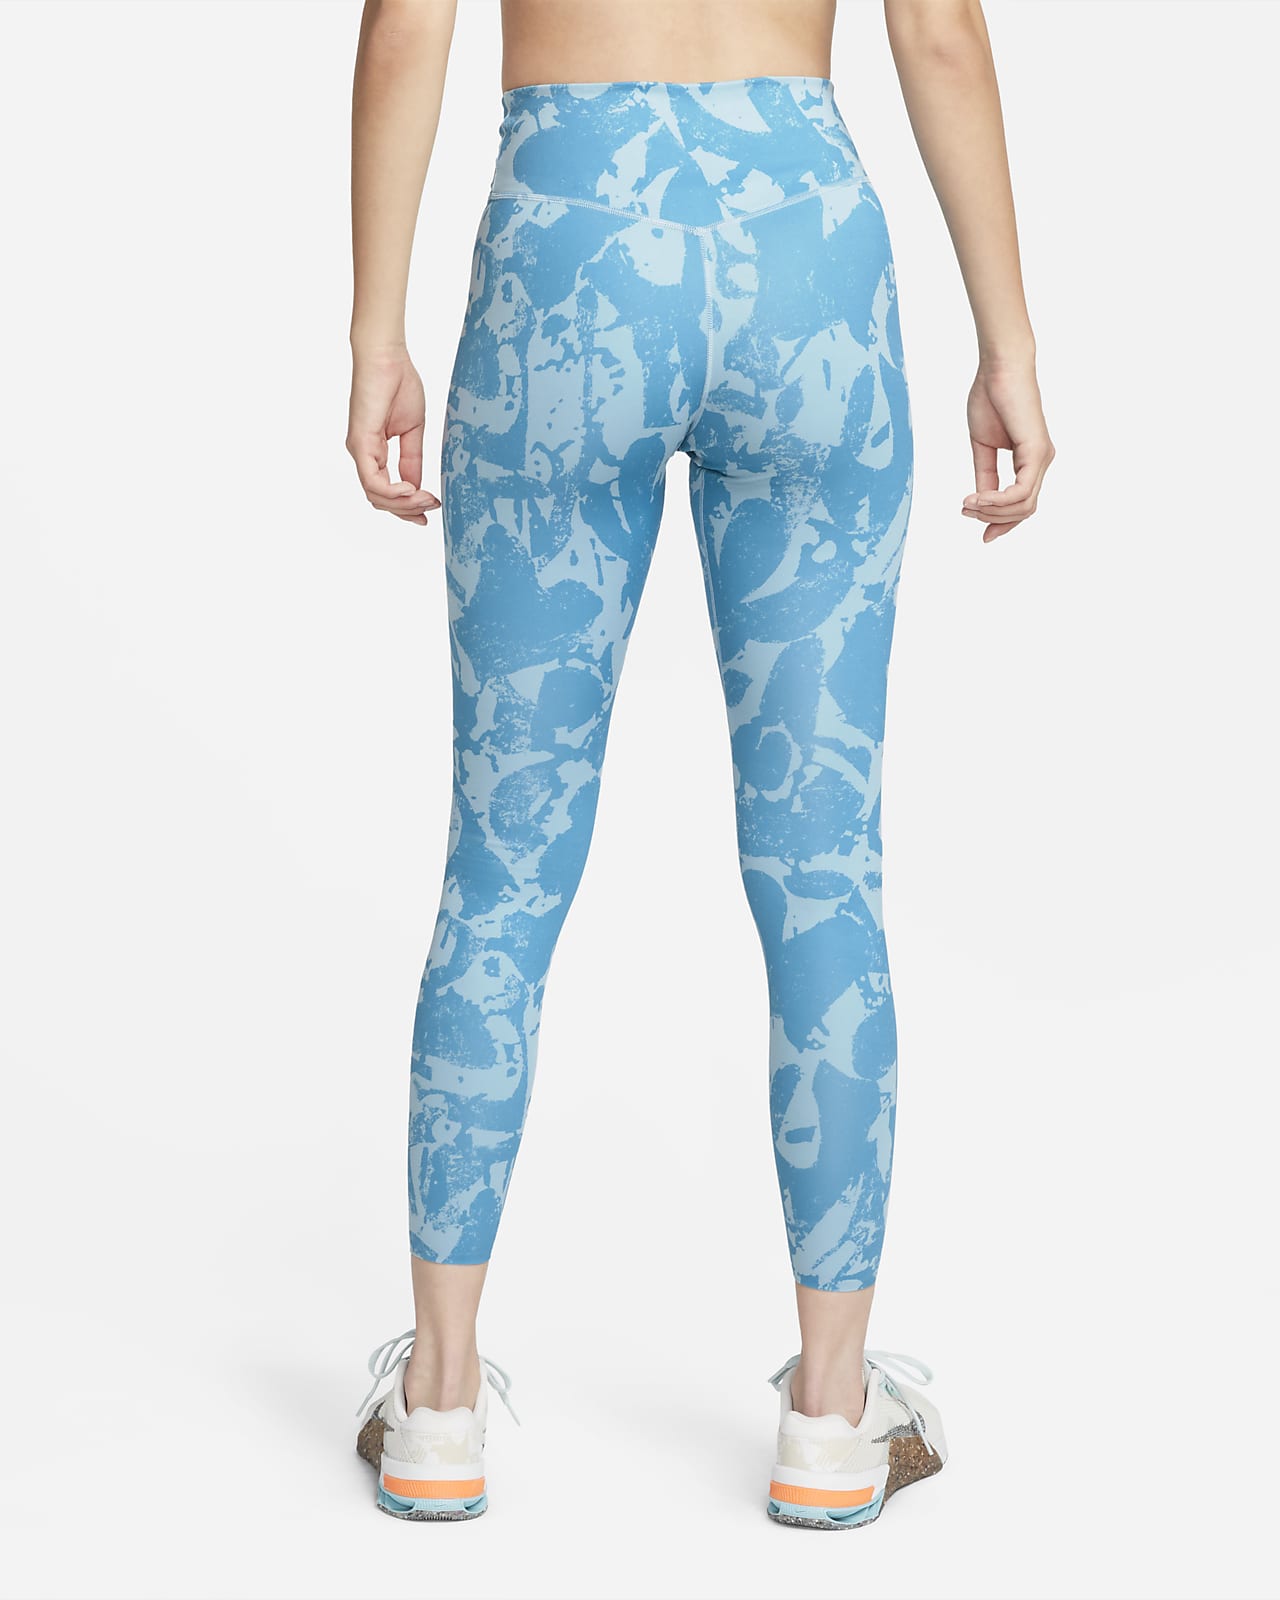 NIKE Women's One Icon Clash Printed Ankle Leggings (Plus Size 3X) NWT MSRP  $60